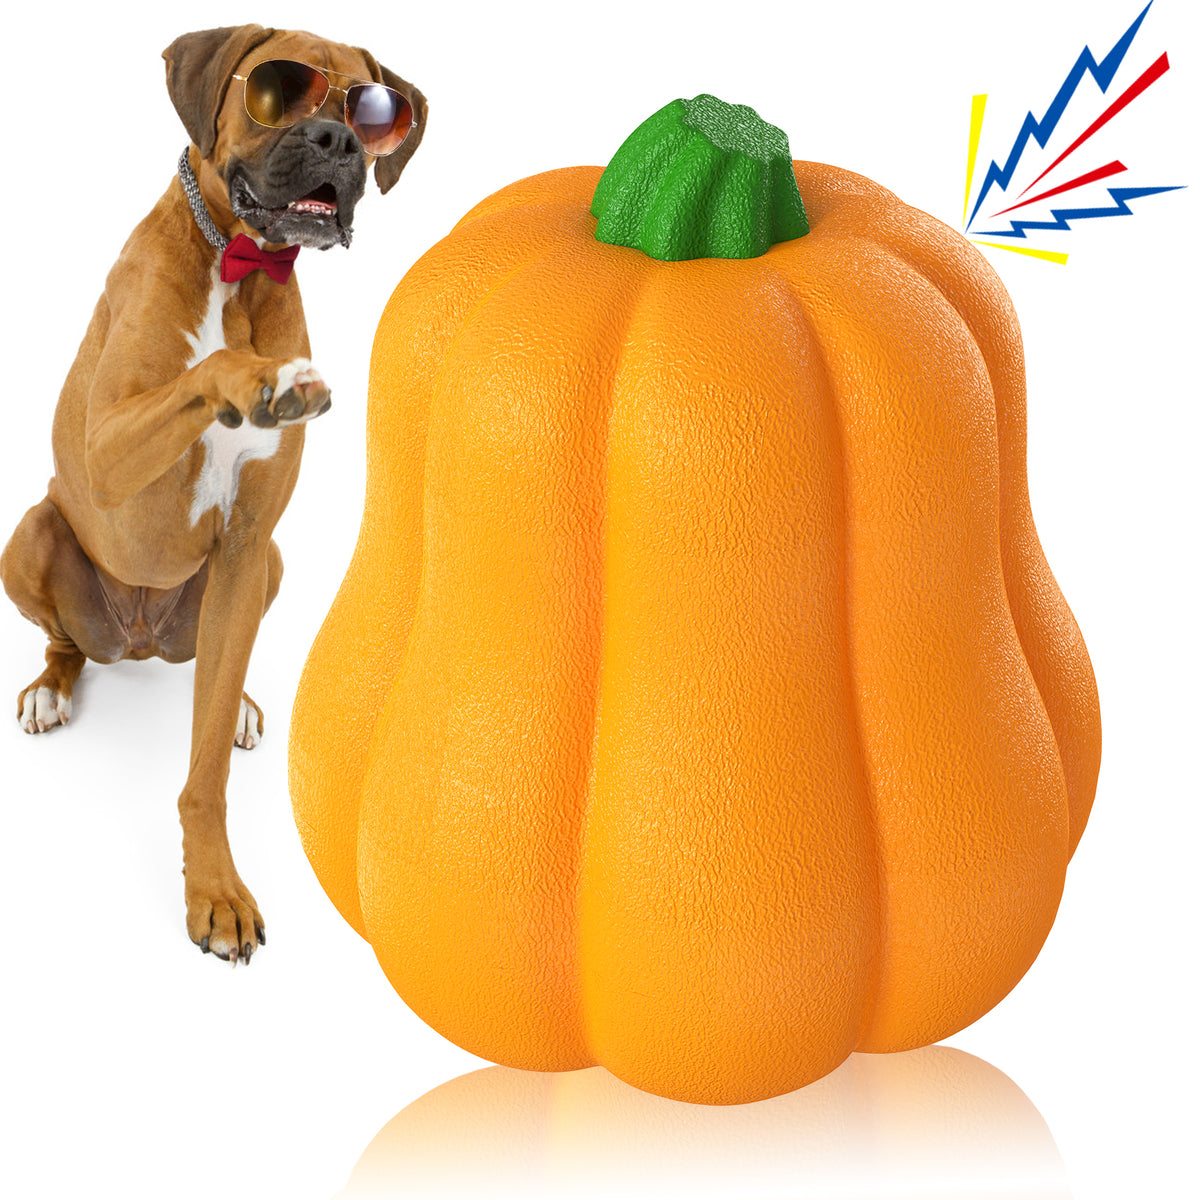 KADTC Dog Chew Toys for Aggressive Chewers Indestructible Tough Durable Squeaky Interactive Puppy Toy Teeth Squeaky Pumpkin Pet Teeth Grinding Toy